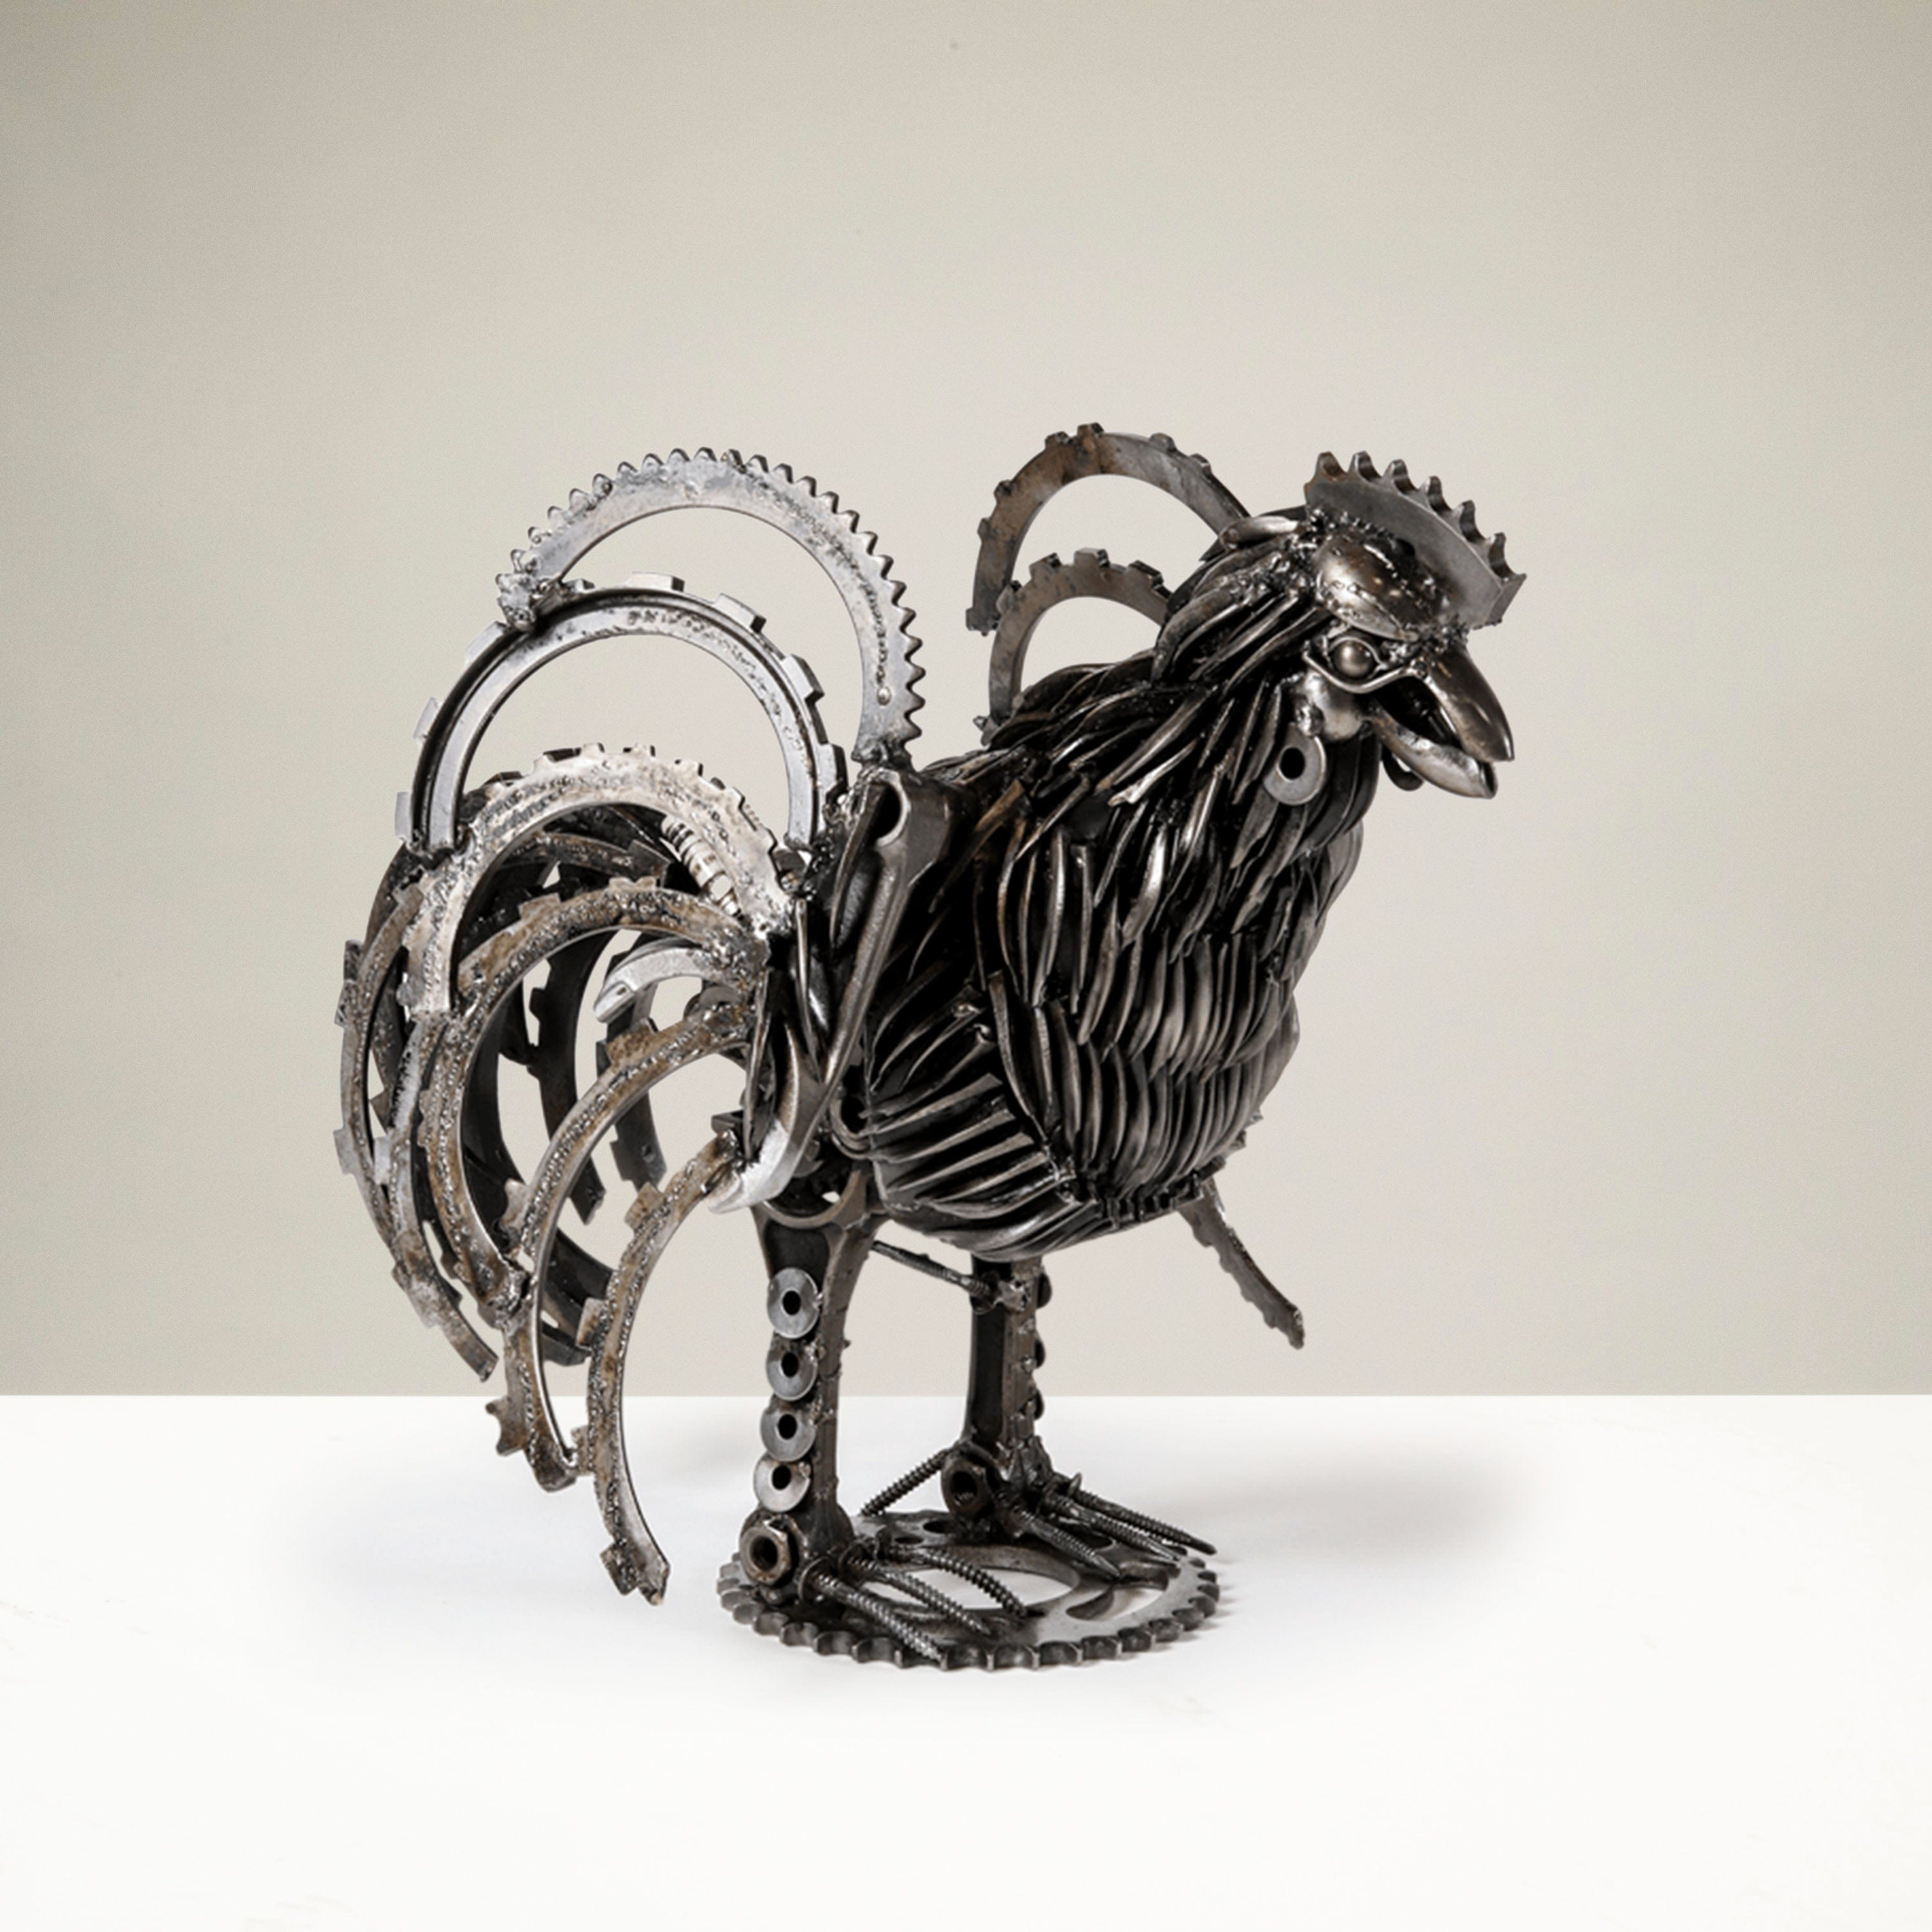 Kalifano Recycled Metal Art Rooster Inspired Recycled Metal Sculpture RMS-R50x35-S